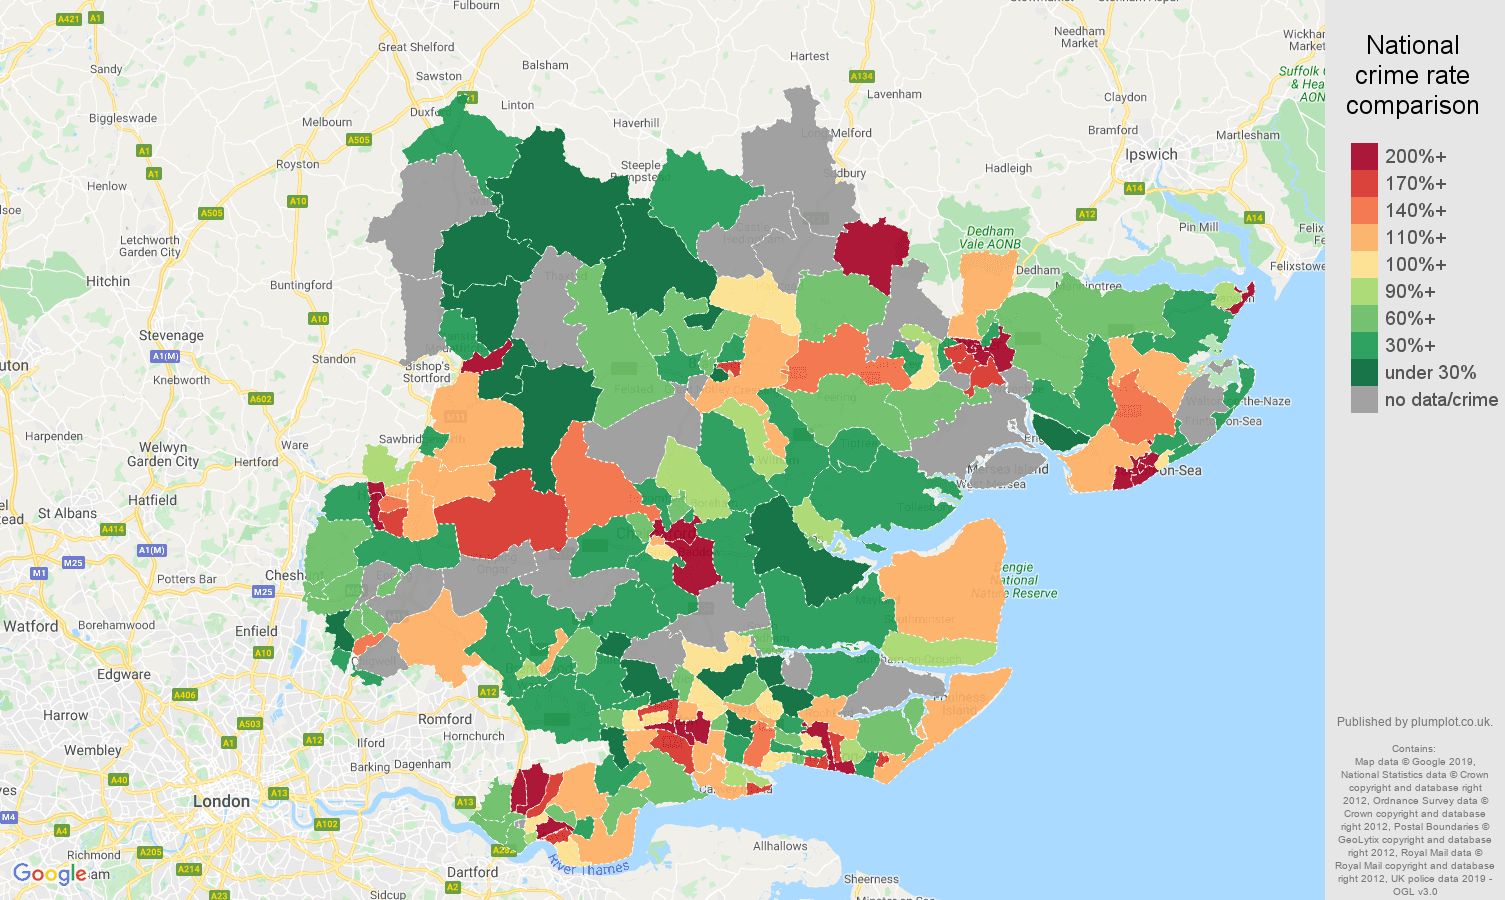 Essex possession of weapons crime rate comparison map